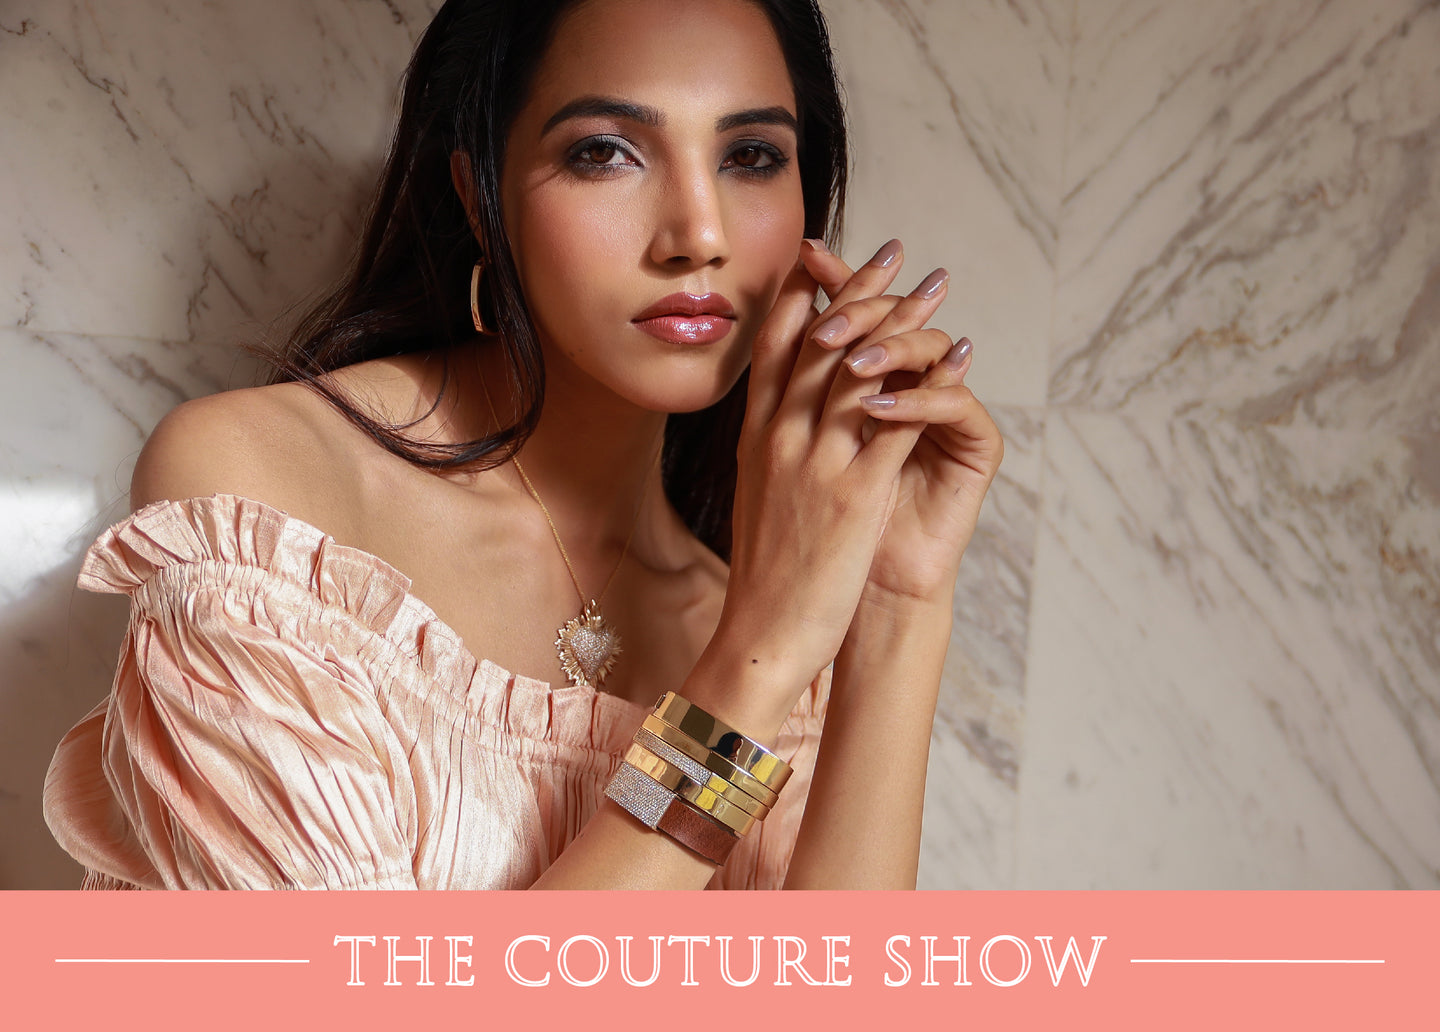 Book an appointment at The Couture Show